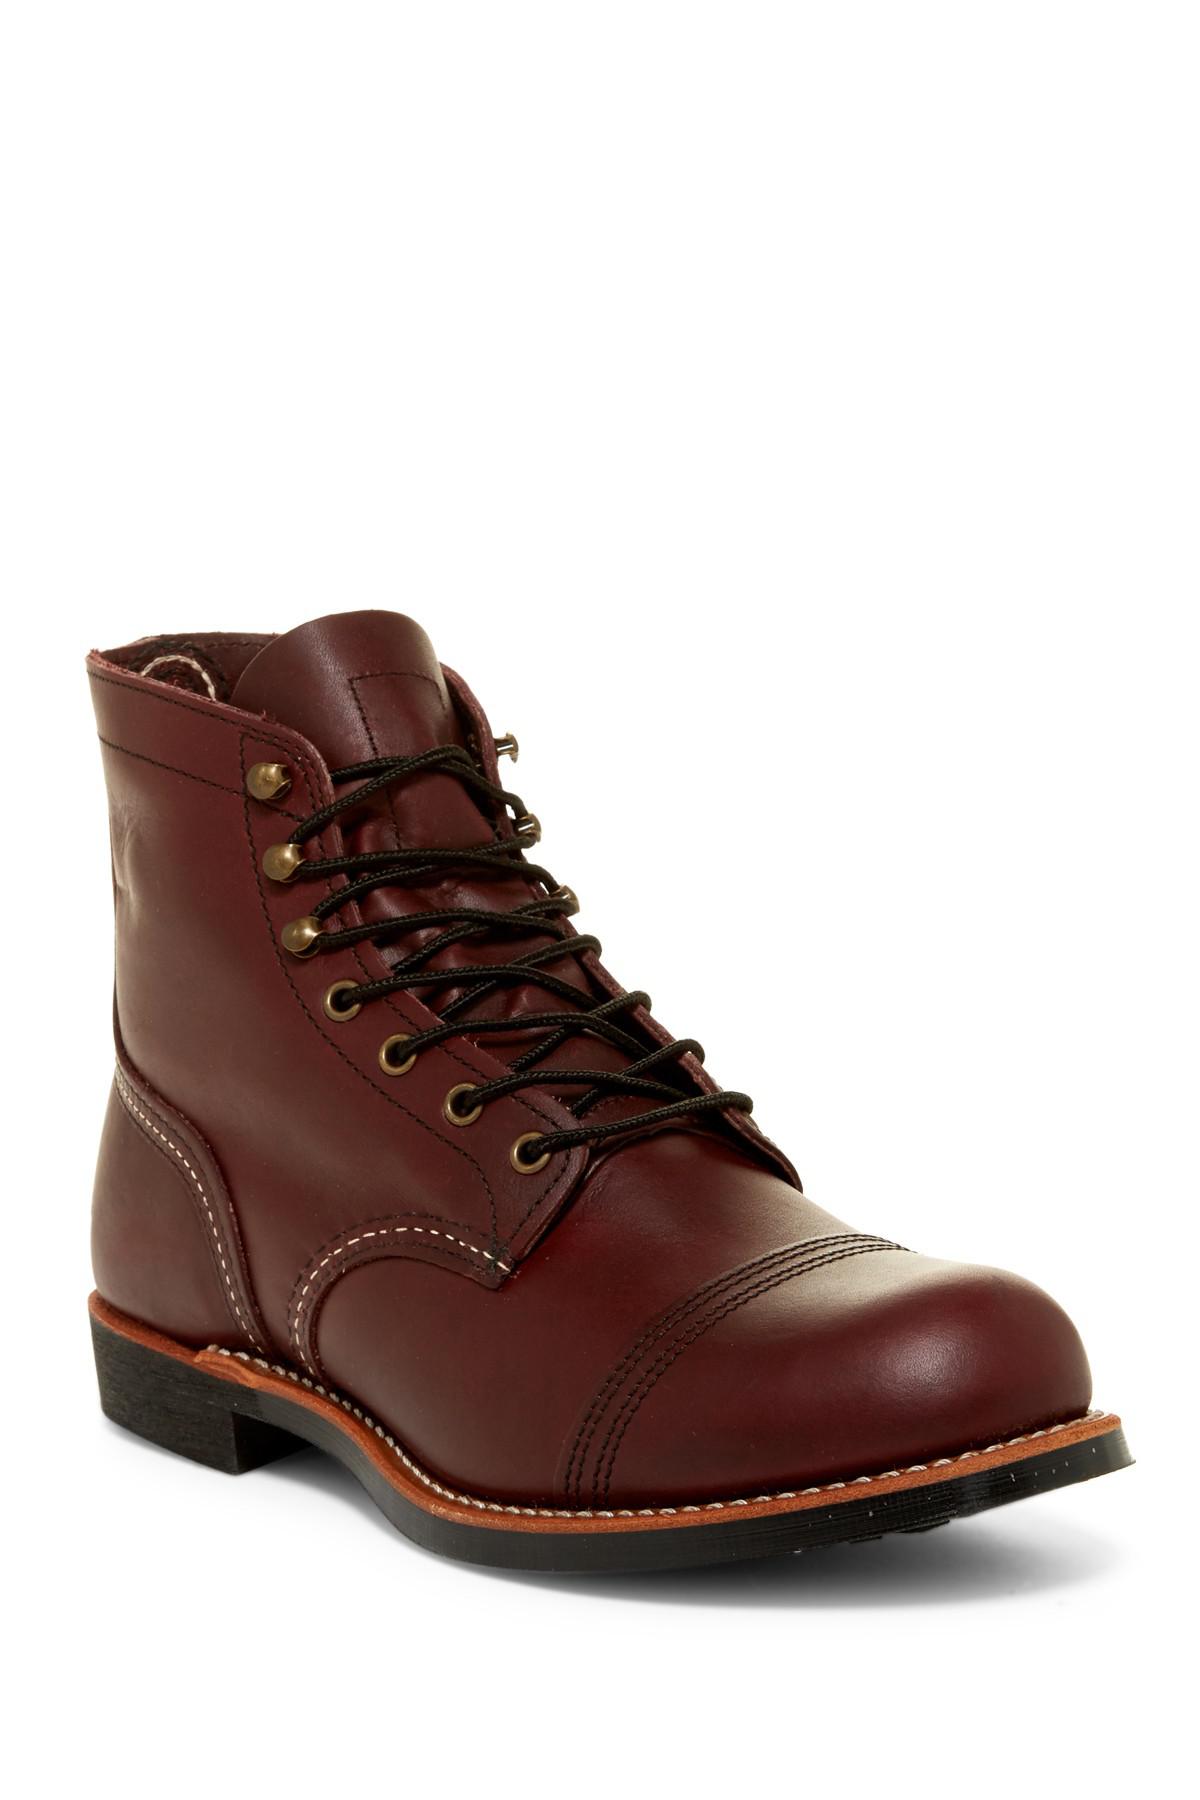 Red Wing Leather Iron Ranger Cap Toe Boot - Factory Second in Brown for ...